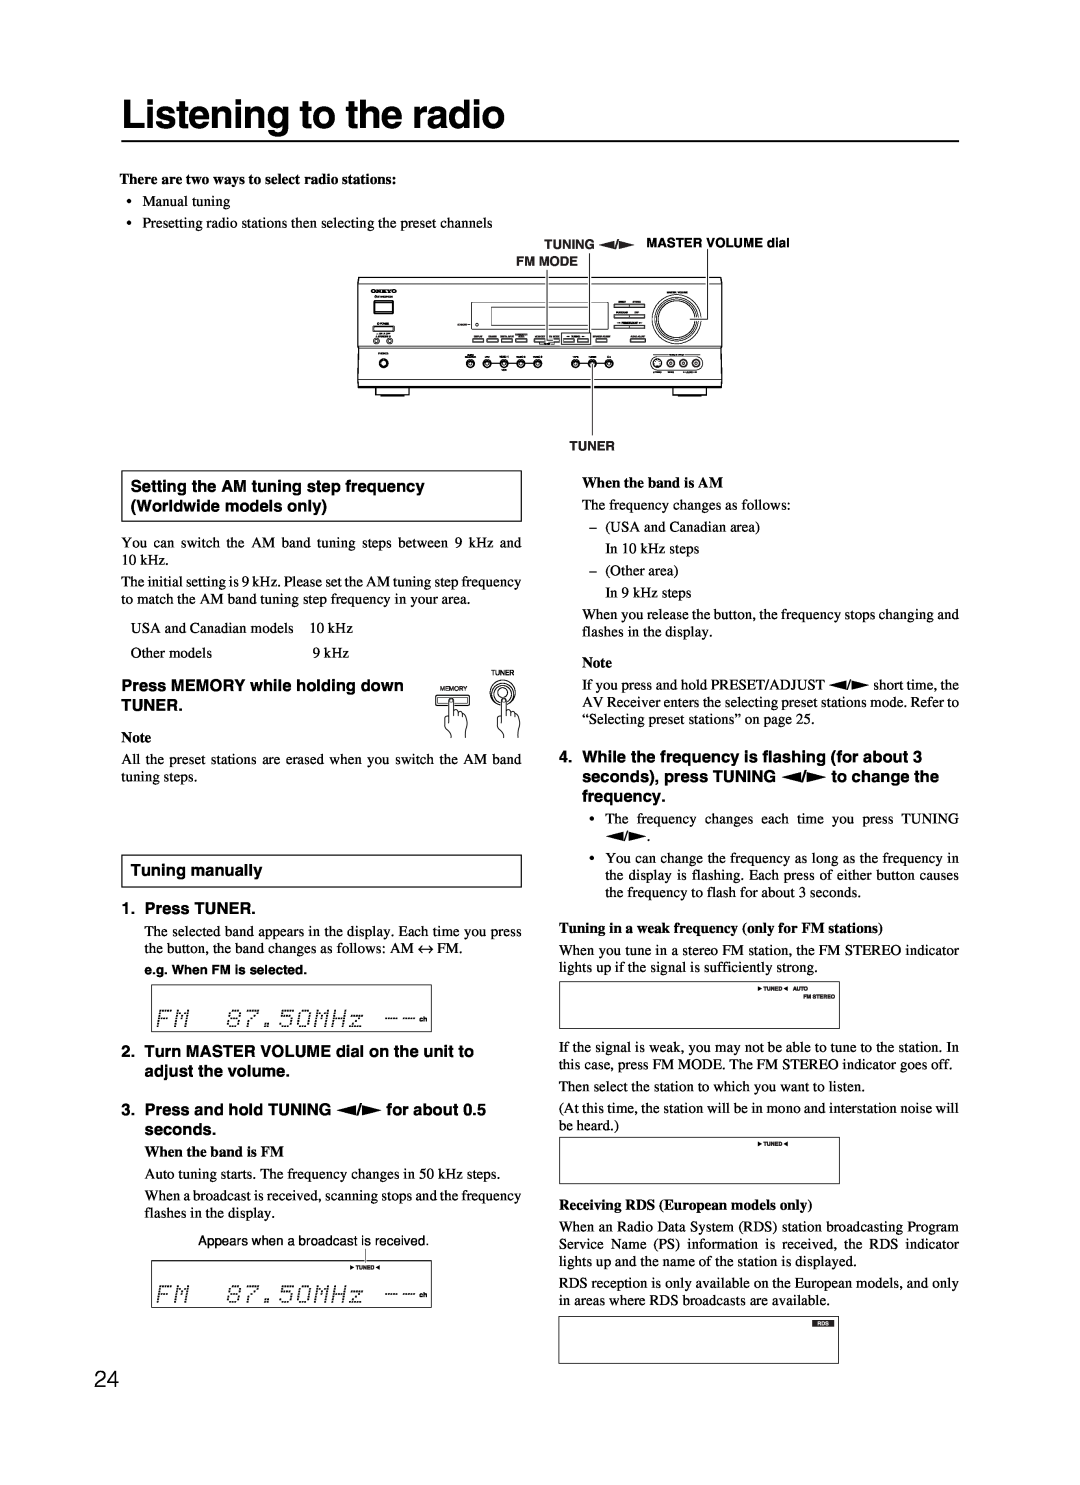 Onkyo TX-SR500 appendix Listening to the radio, There are two ways to select radio stations, When the band is AM 